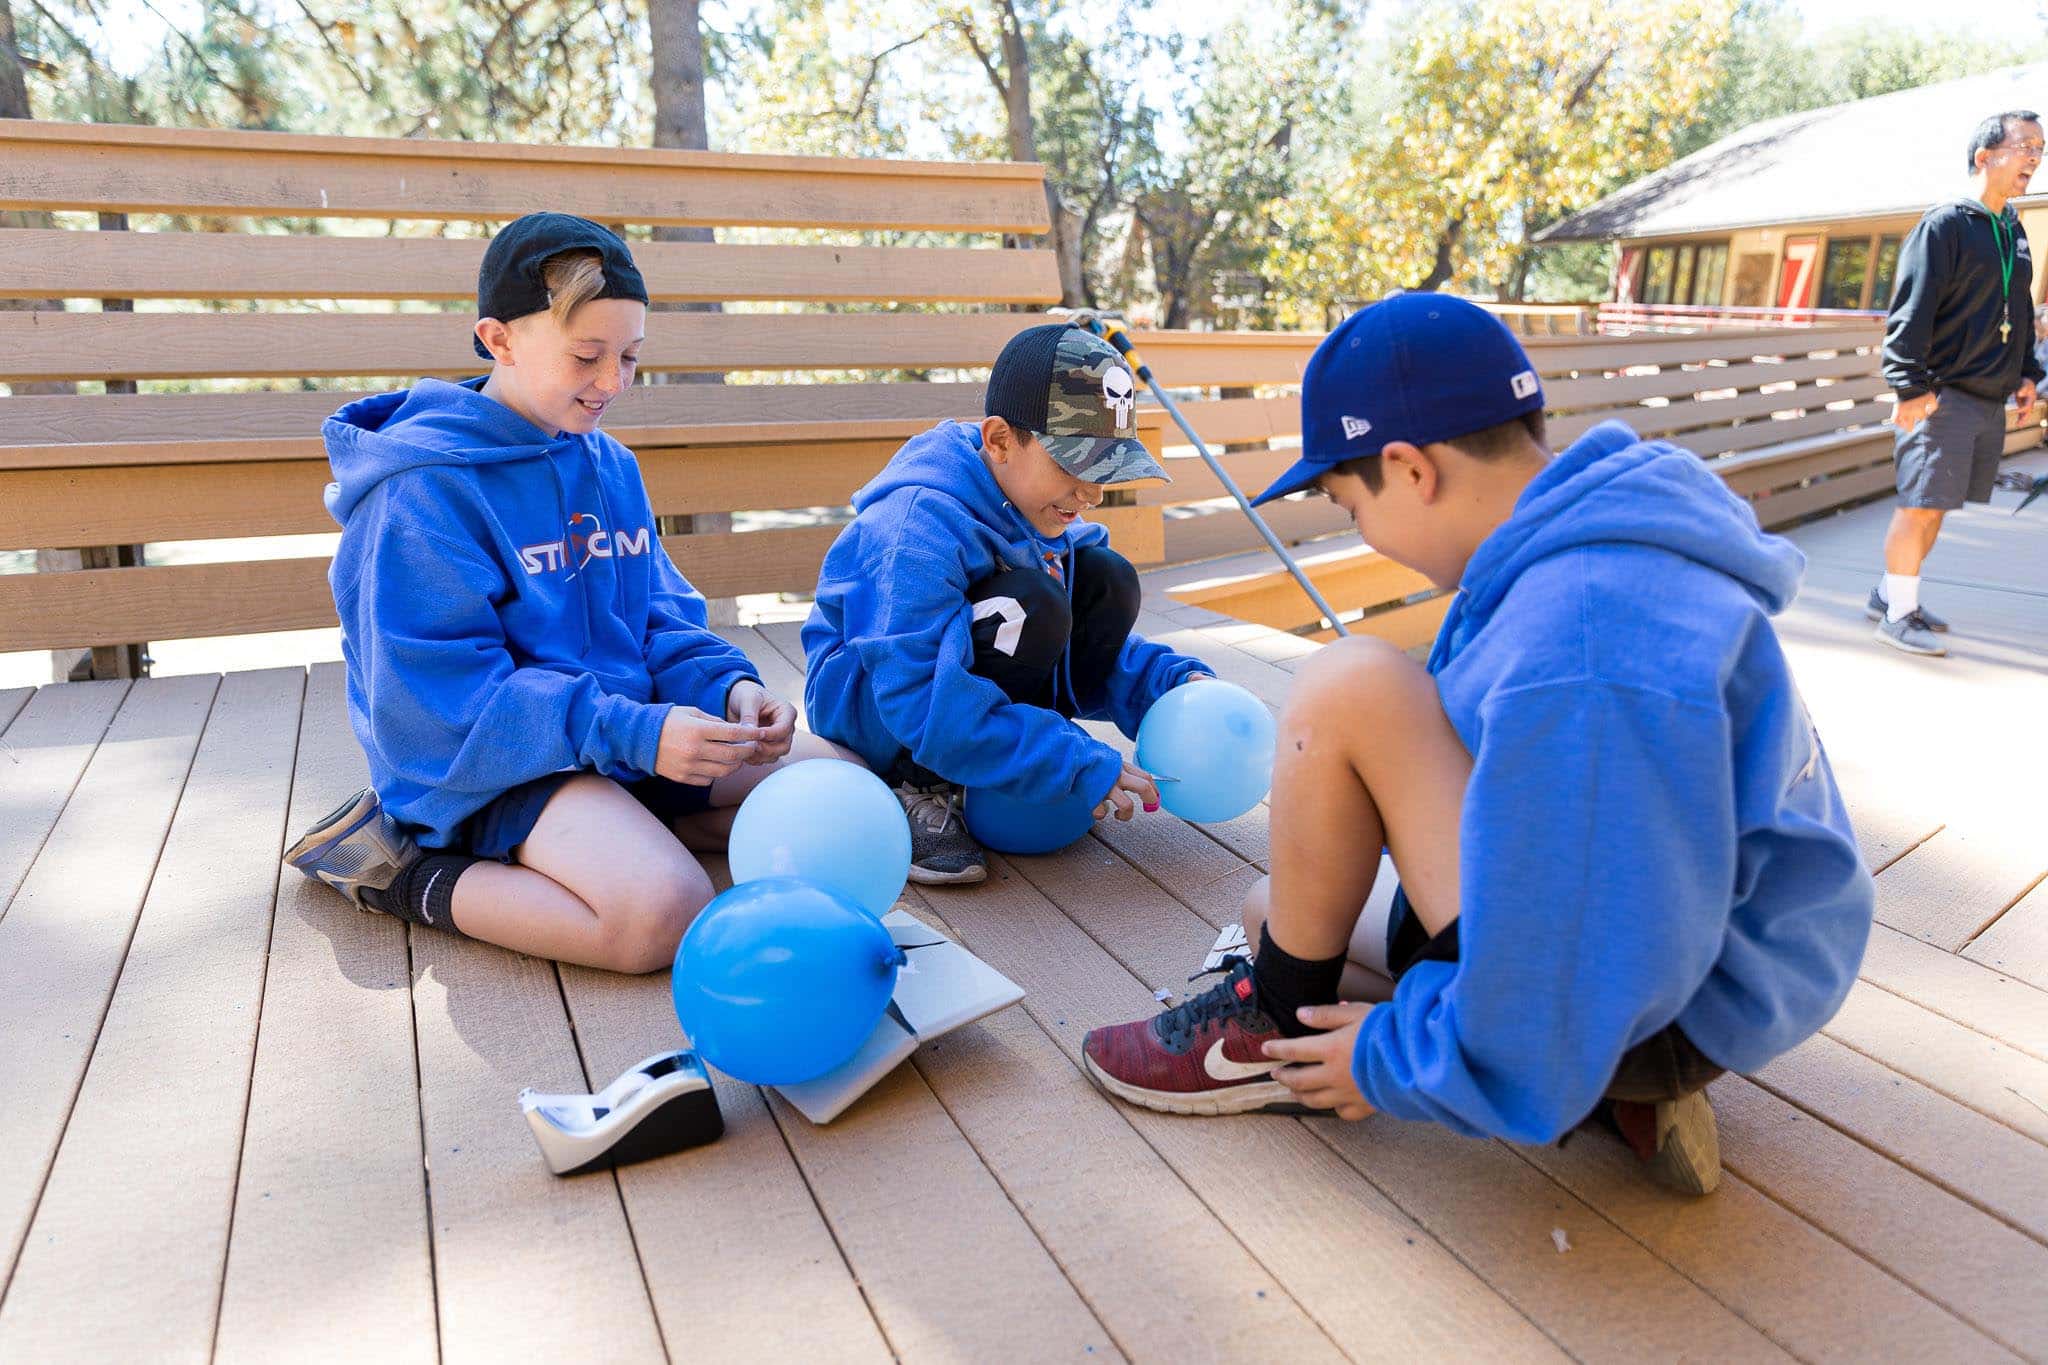 Boys playing with balloons.